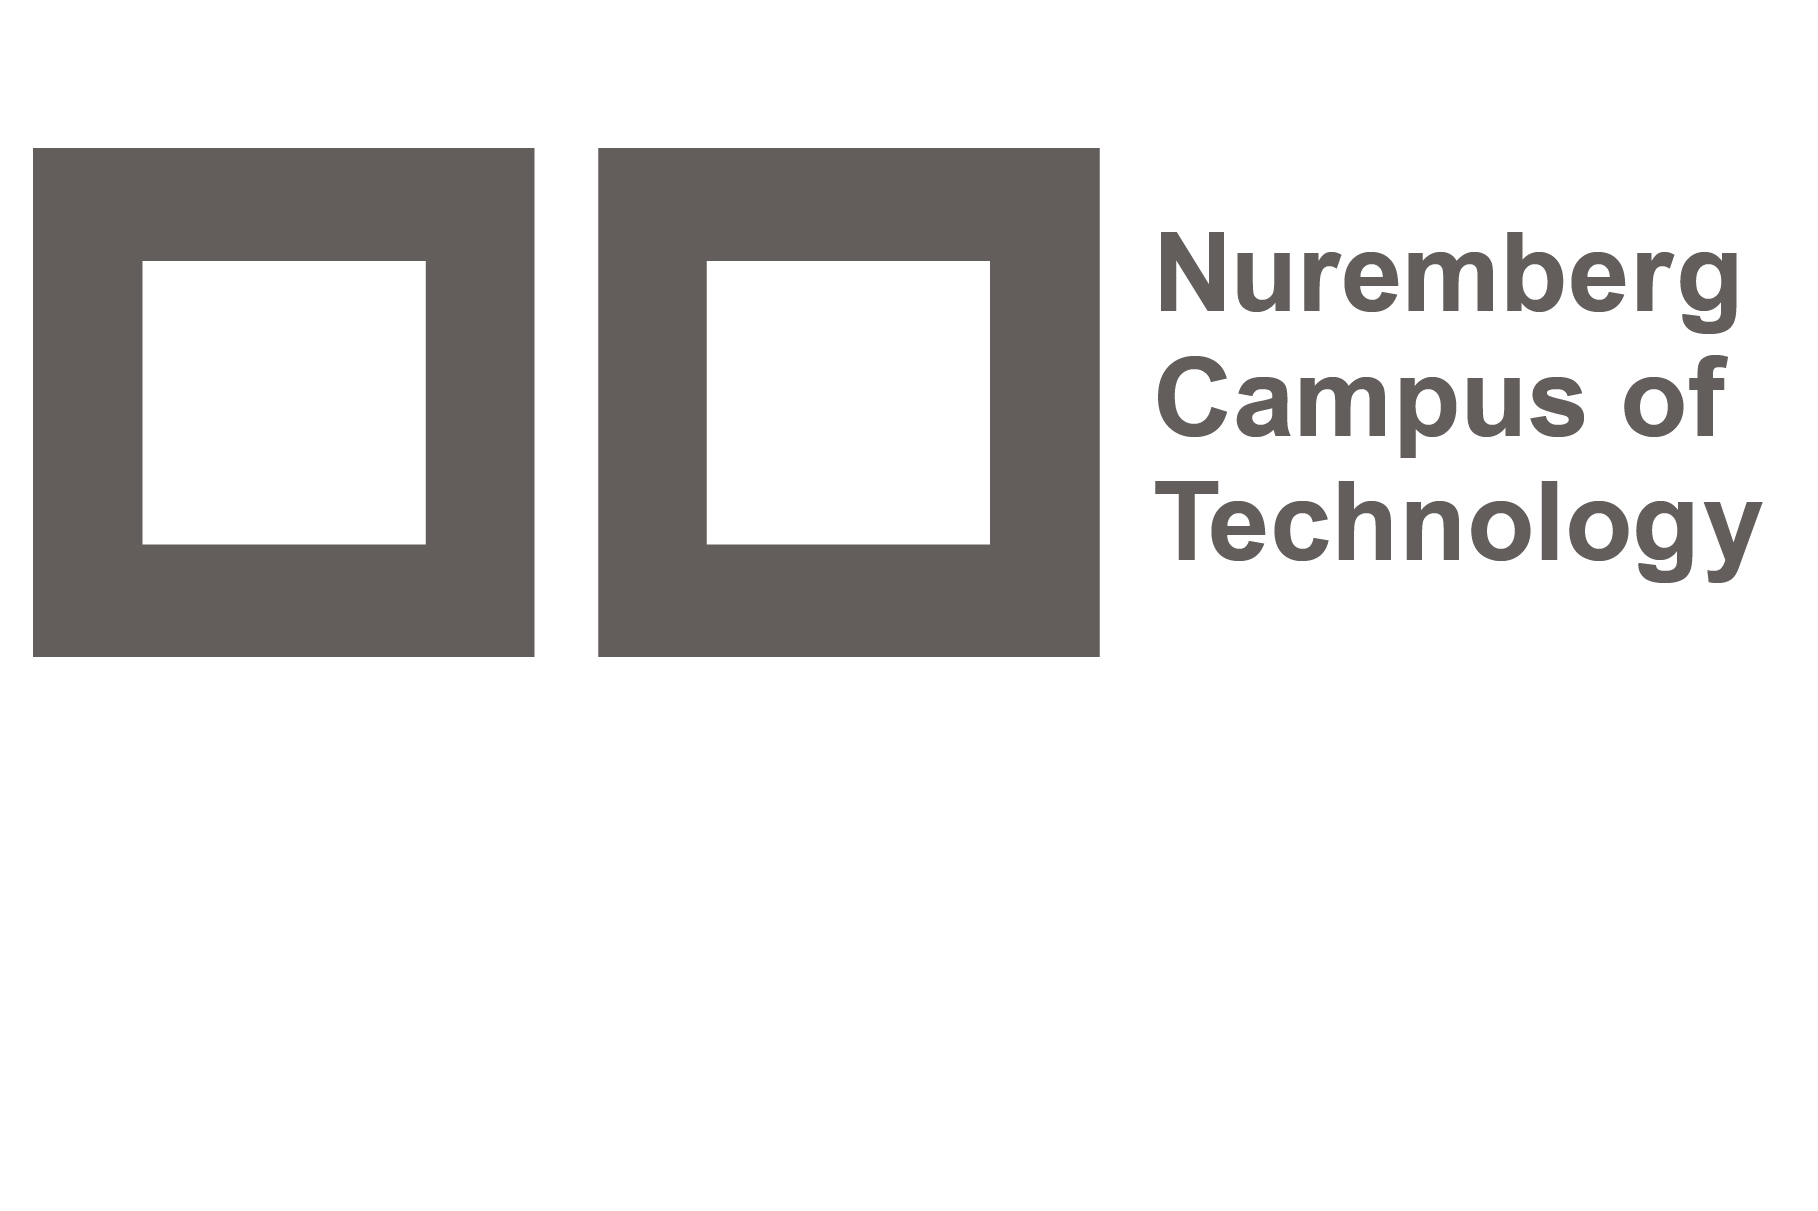 Towards page "Nuremberg Campus of Technology